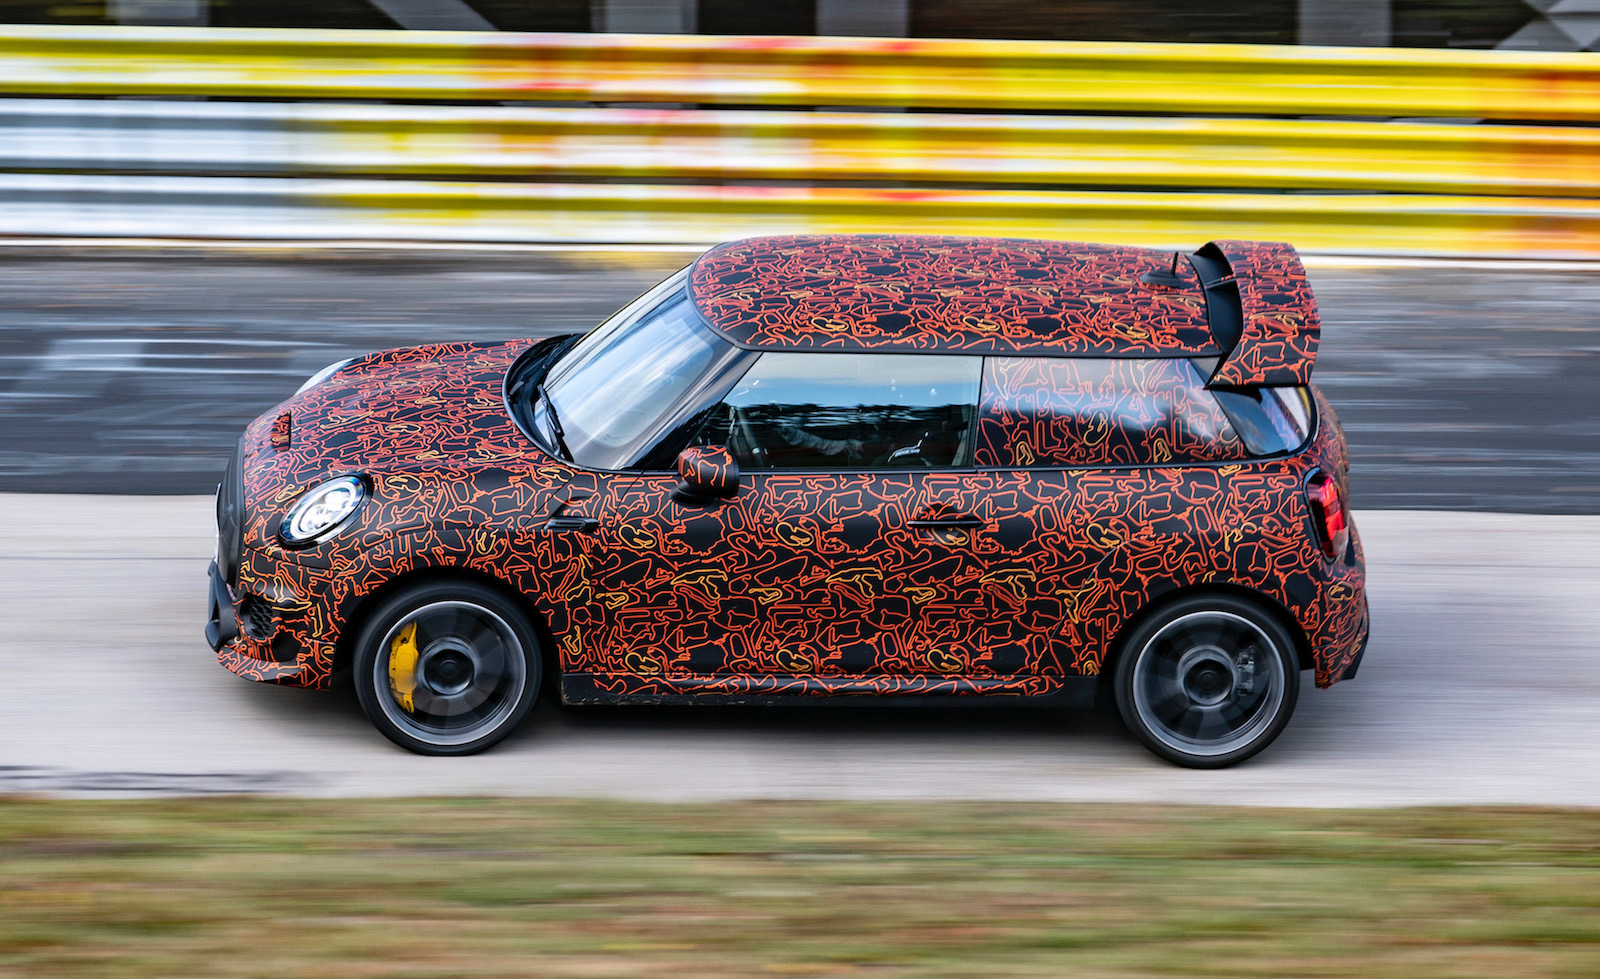 MINI confirms it is working on electric JCW models